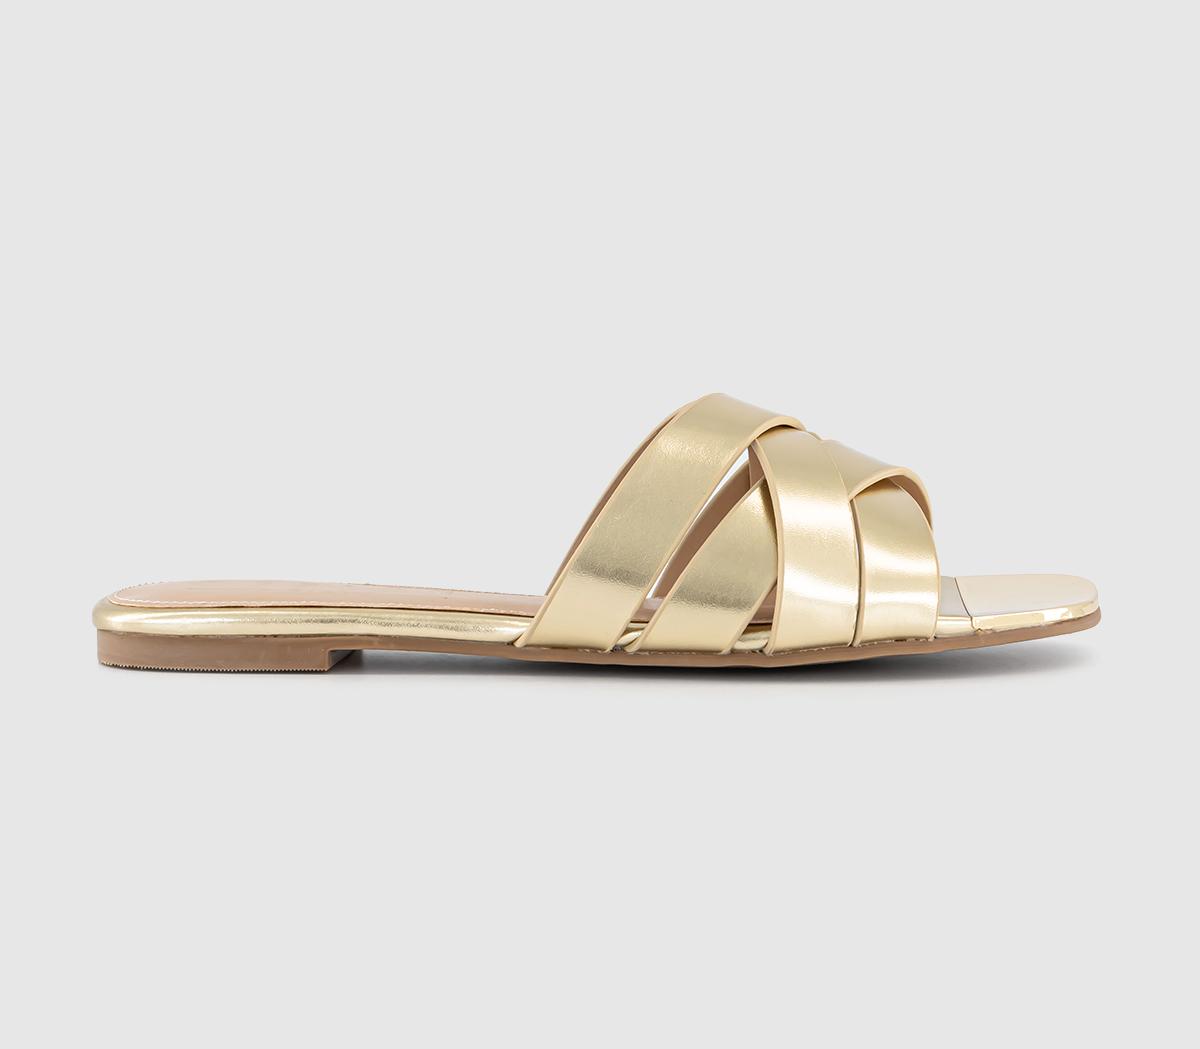 OFFICESearching Metal Toe Slider SandalsGold